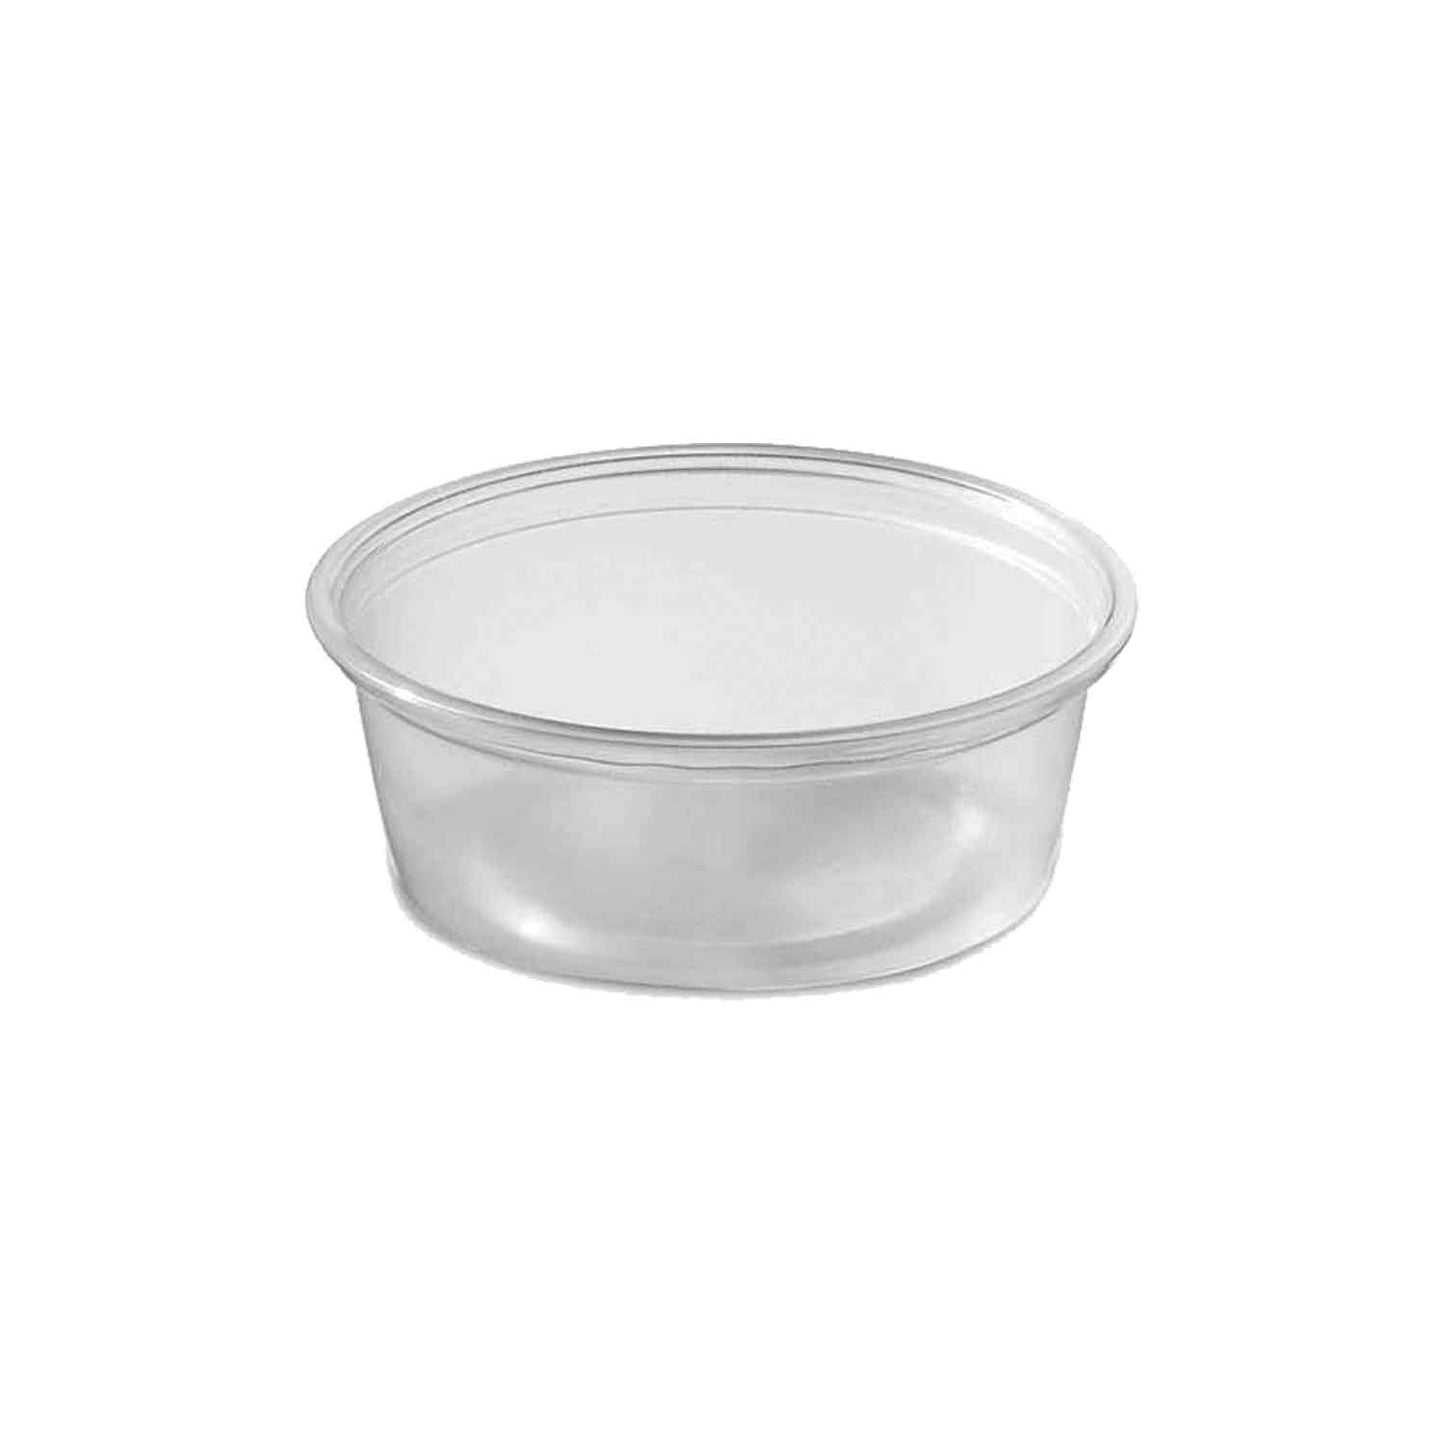 PORTION CUP CLEAR 1.5 OZ 50